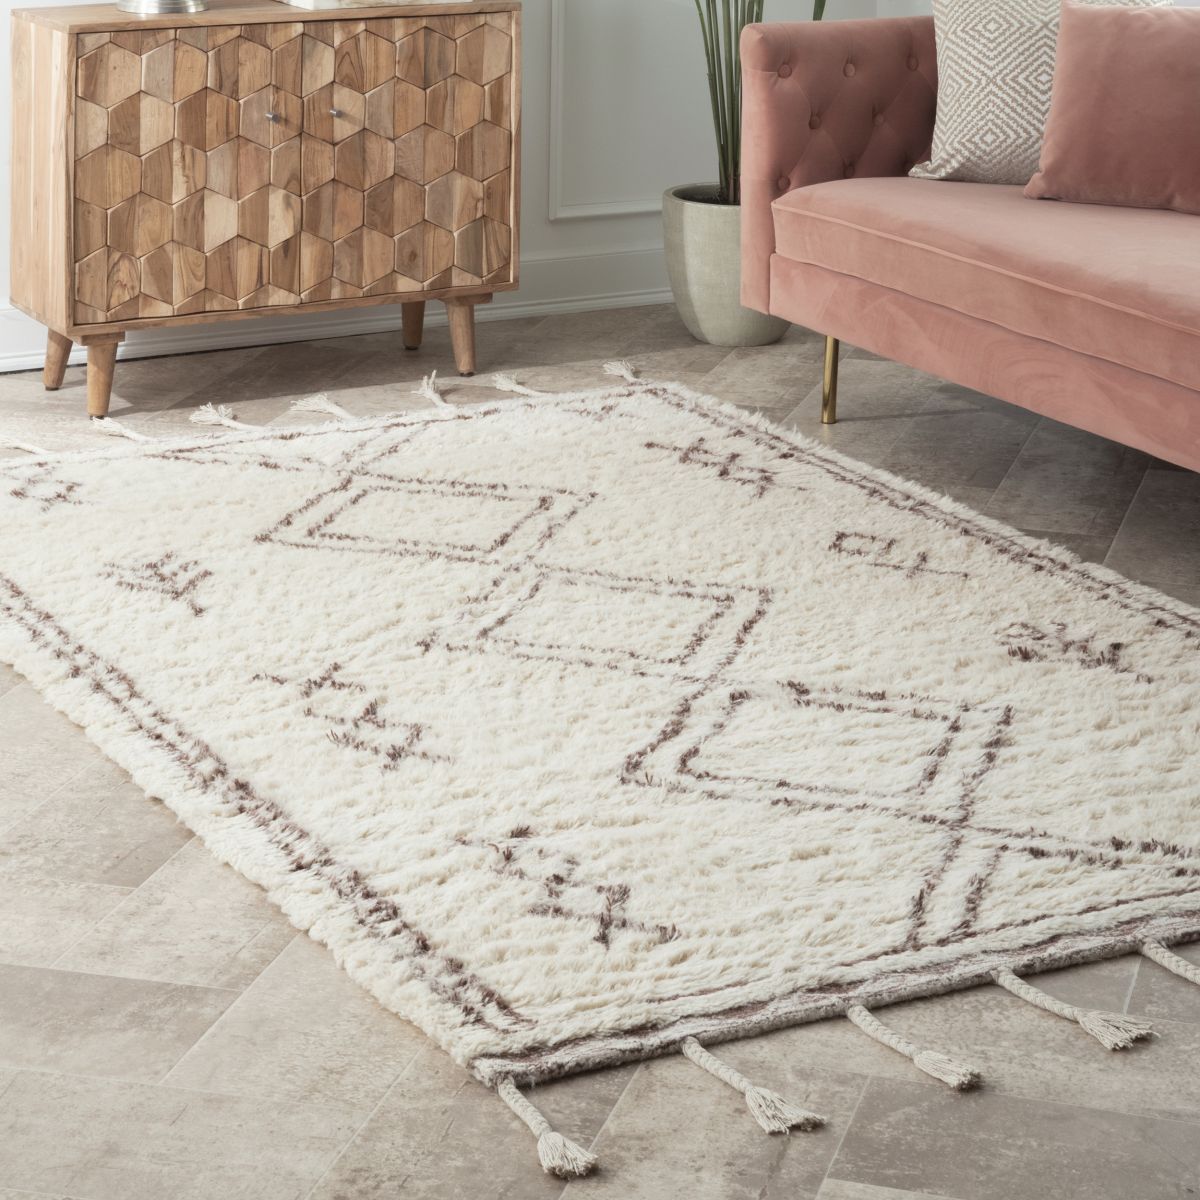 Beige Shaggy Double Helix With Tassels 7' 6" x 9' 6" Area Rug | Rugs USA